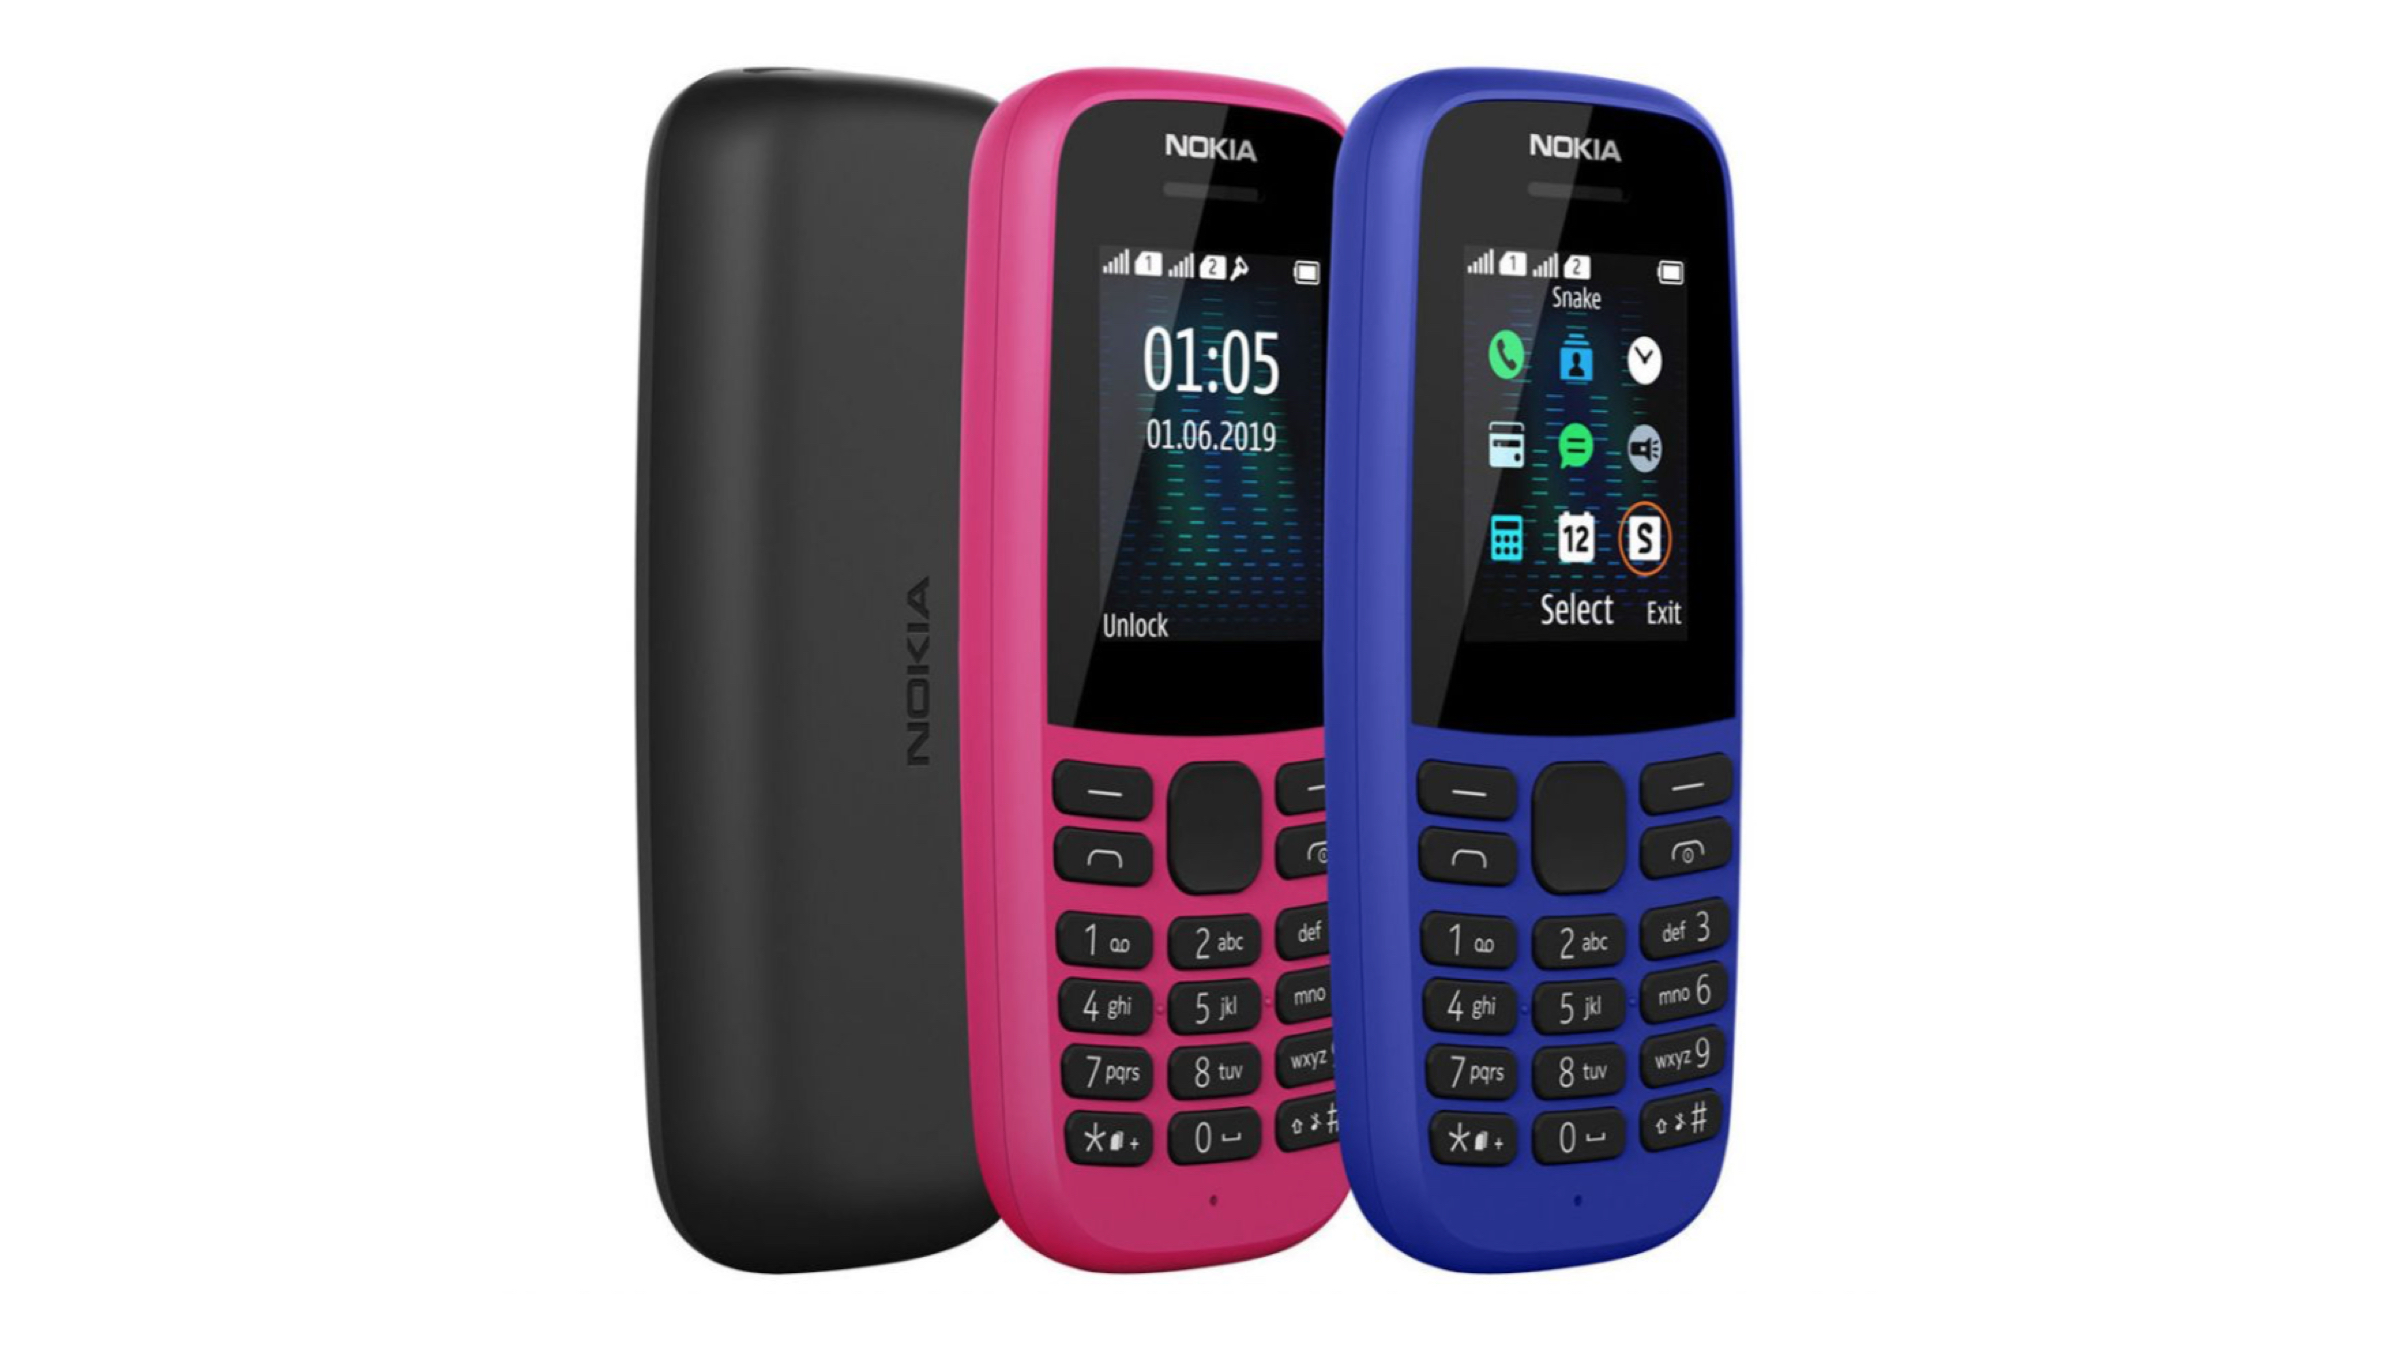 Nokia 220 4g Nokia 105 Launched Features Price Igyaan Network